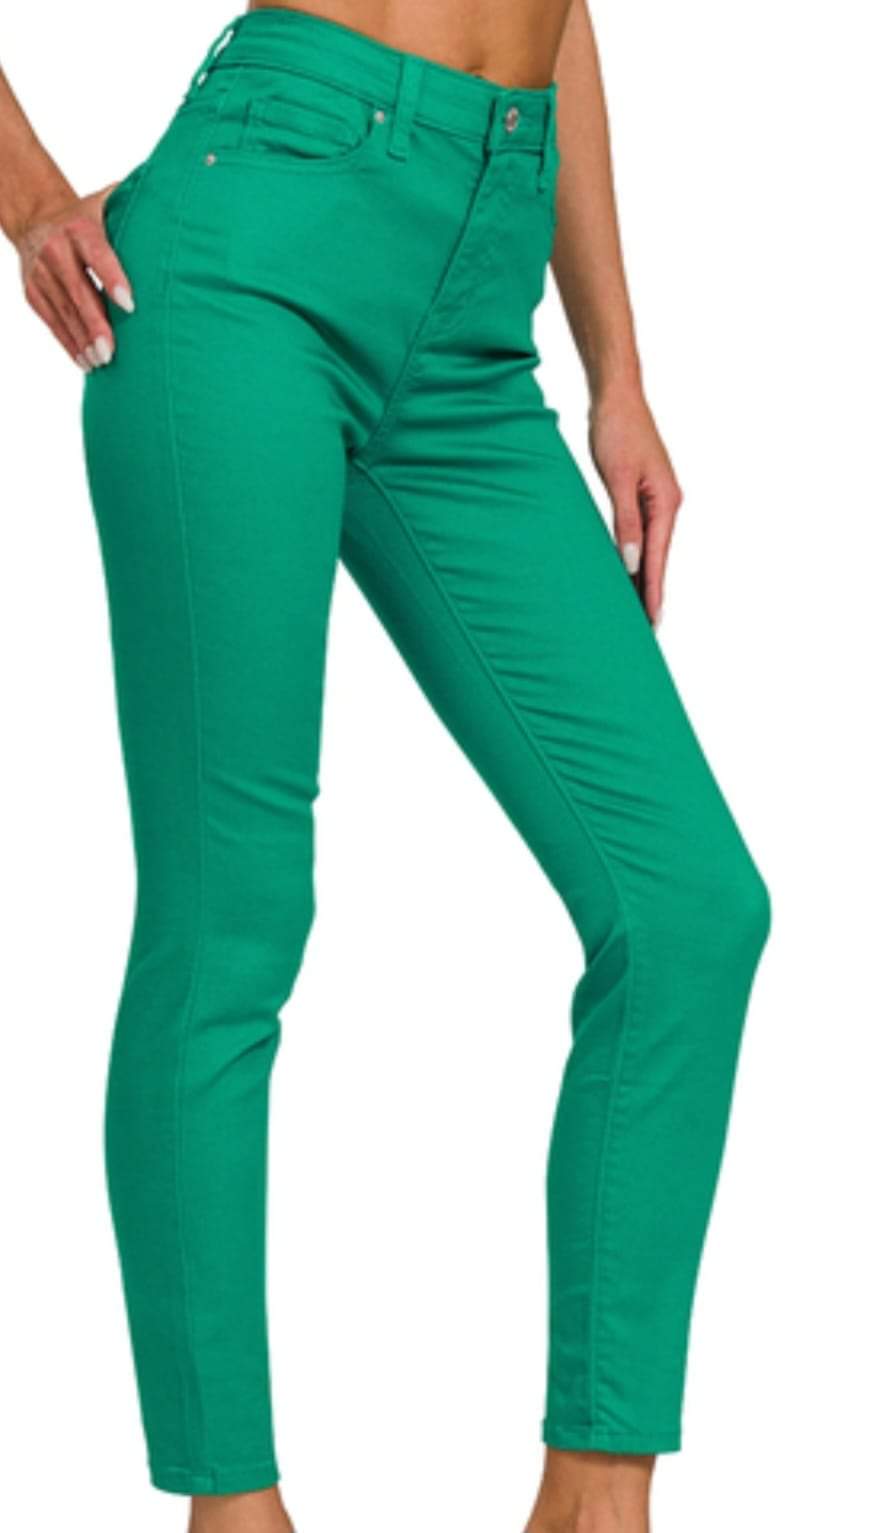 Zenana Stretchy High Rise Skinny Denim Pants / Comes in Yellow, Kelly Green & Purple / Sizes Small - XL